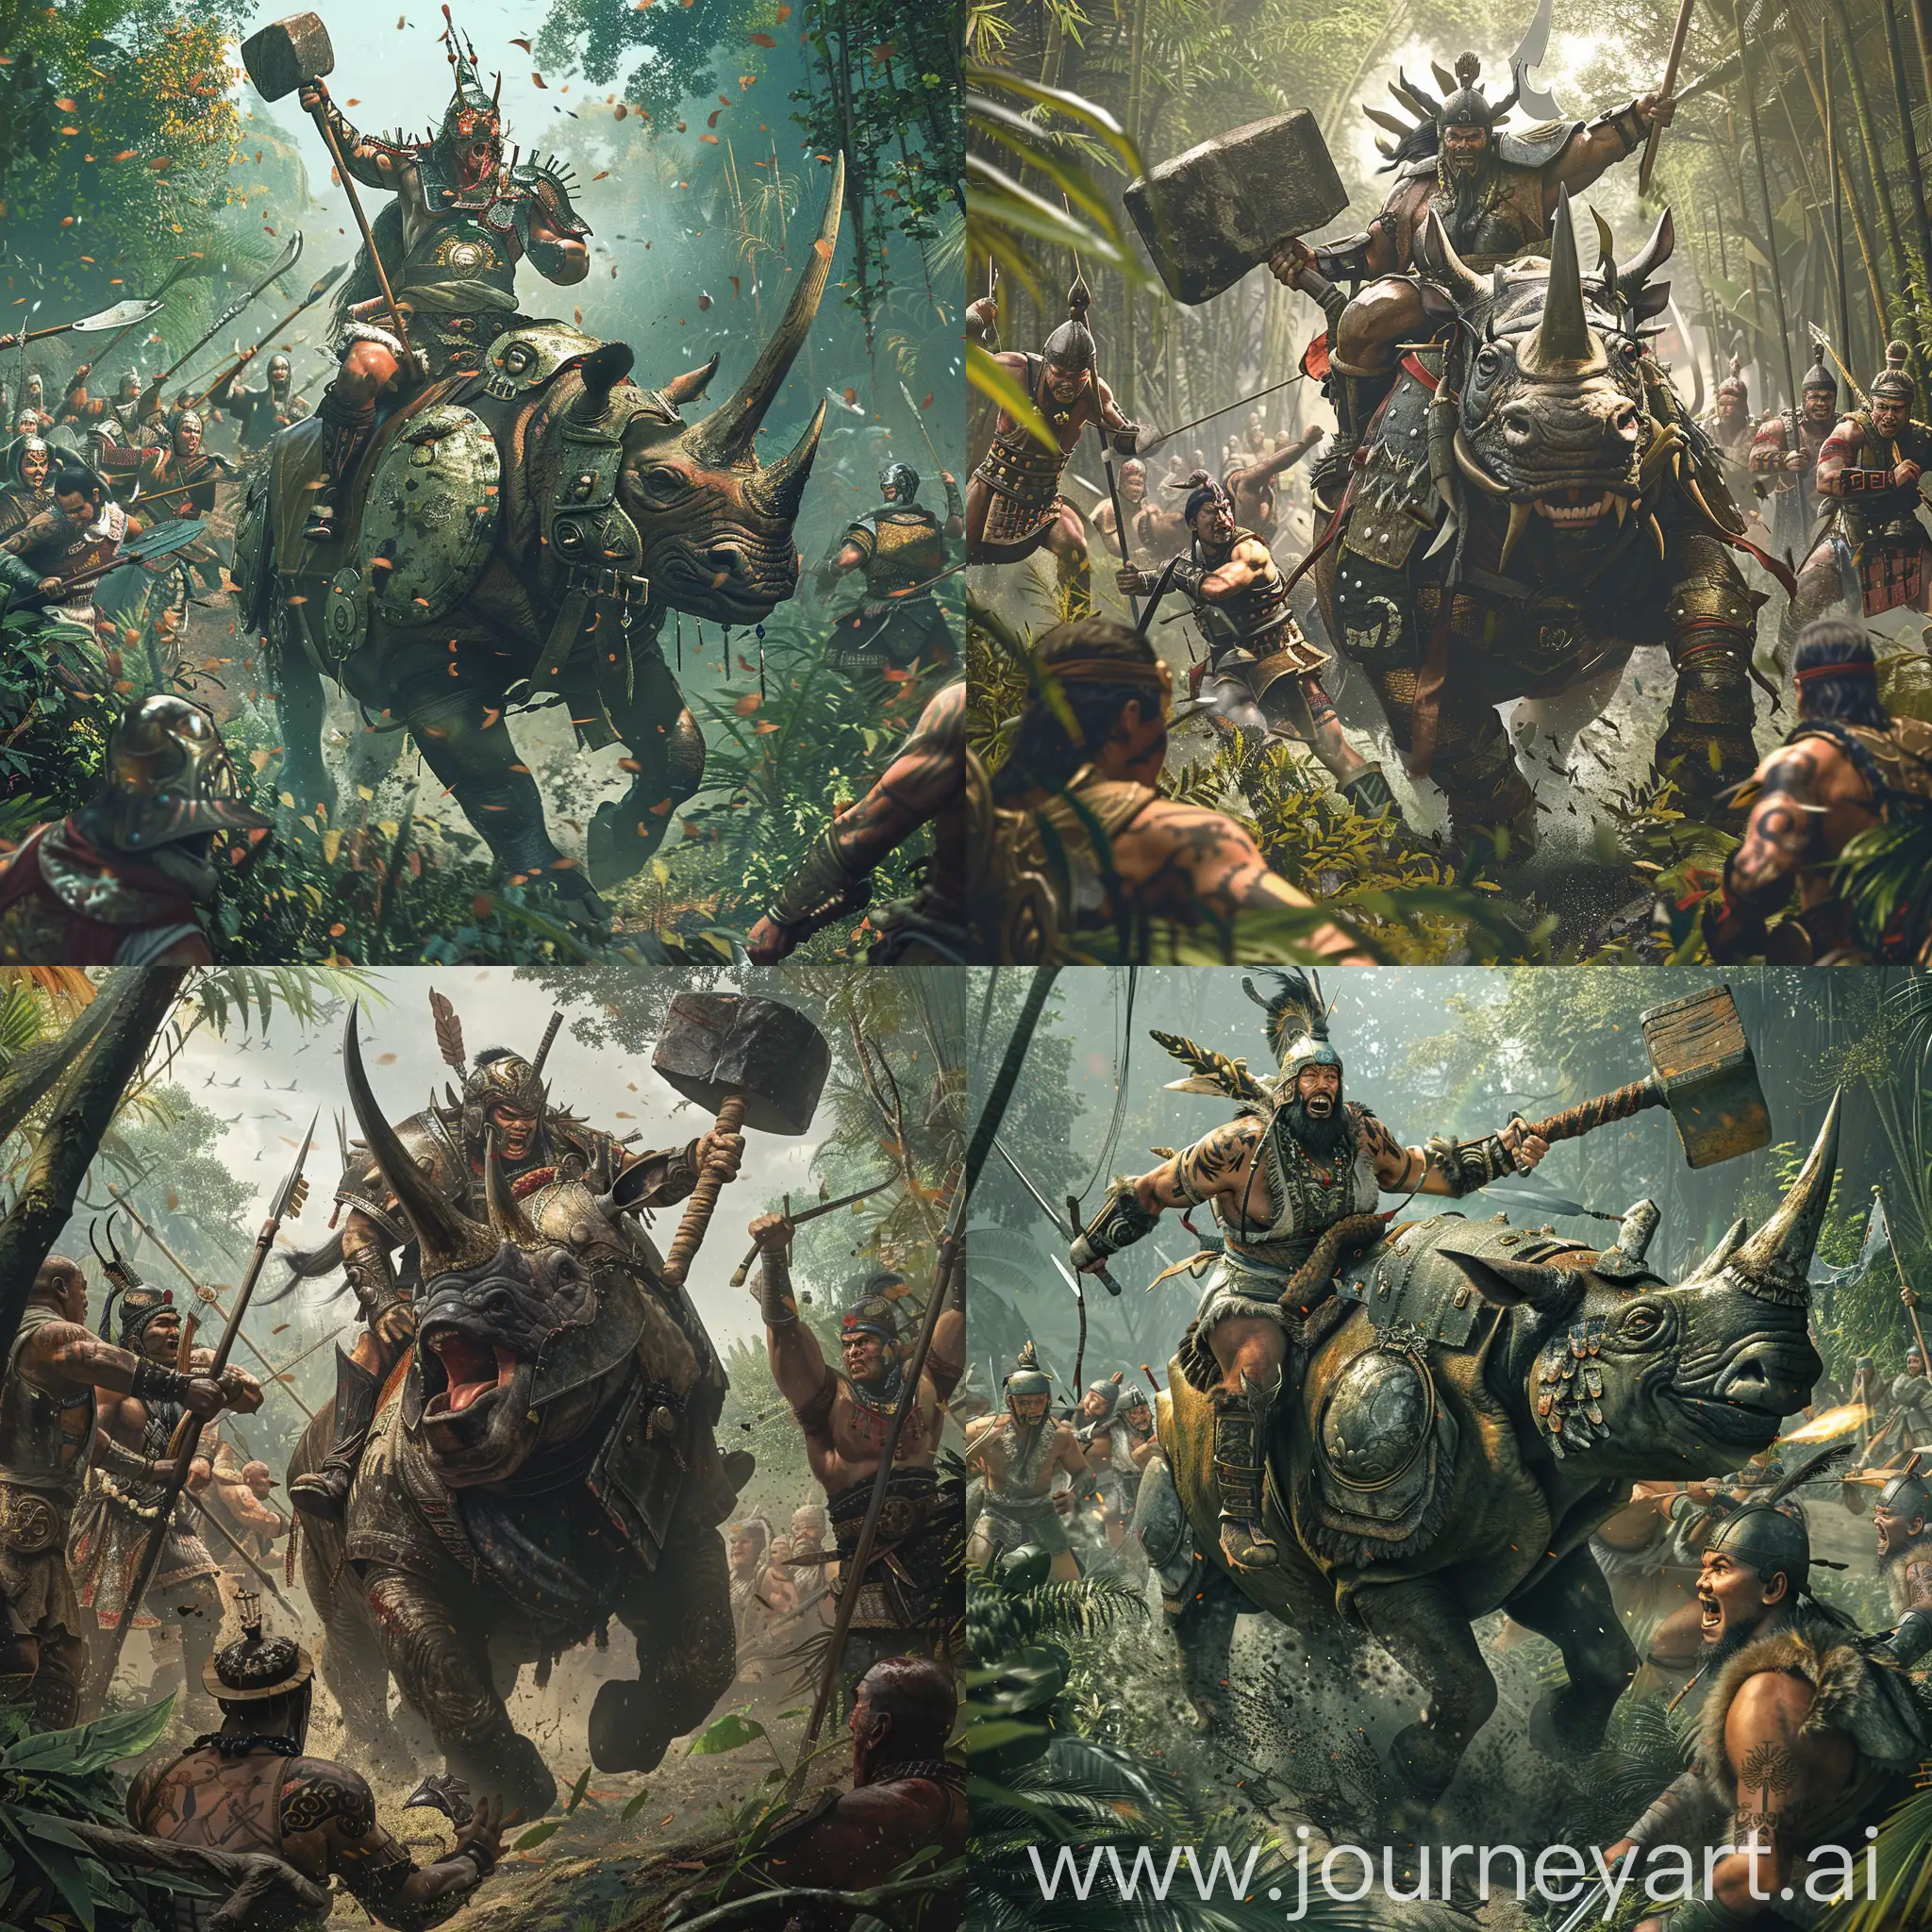  A heavily armored rhinoceros, ridden by a Chu warrior wielding a massive club, bursts through the undergrowth of the southern jungle, scattering Qin soldiers in its path. Behind the rhinoceros, a horde of Chu warriors, adorned with tribal tattoos and wielding a mix of spears, axes, and short swords, surges forward, their faces contorted in a ferocious battle cry.  The image is enhanced with 8k HDR best quality, creating a stunningly realistic scene.